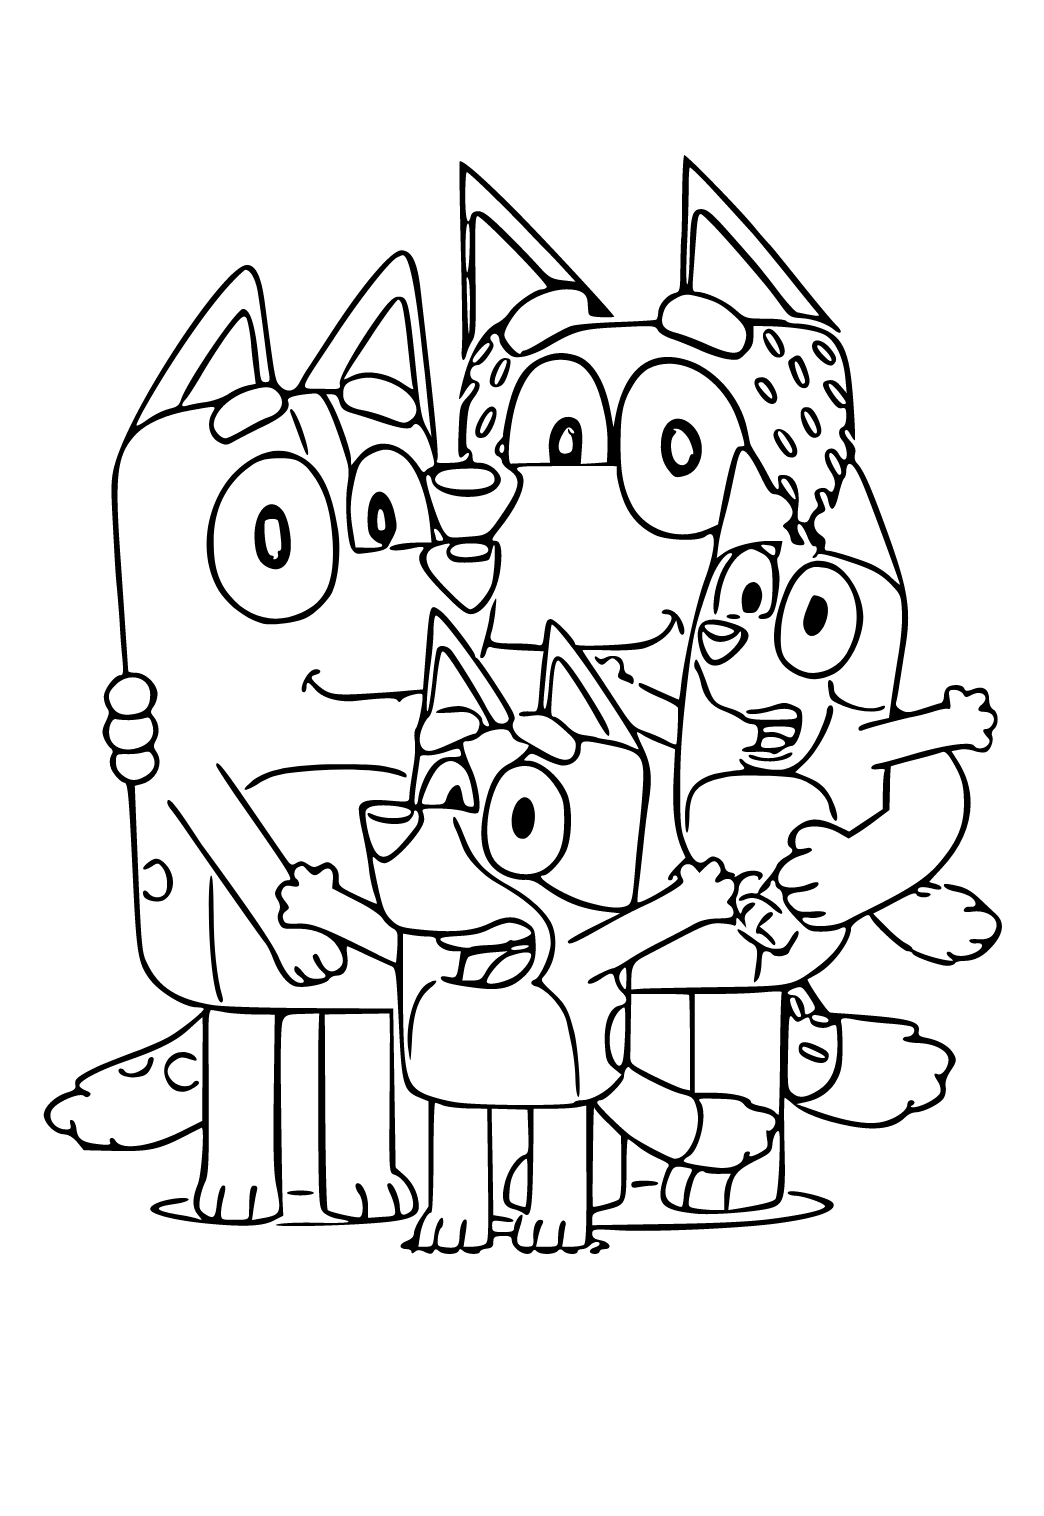 Free printable bluey characters coloring page for adults and kids